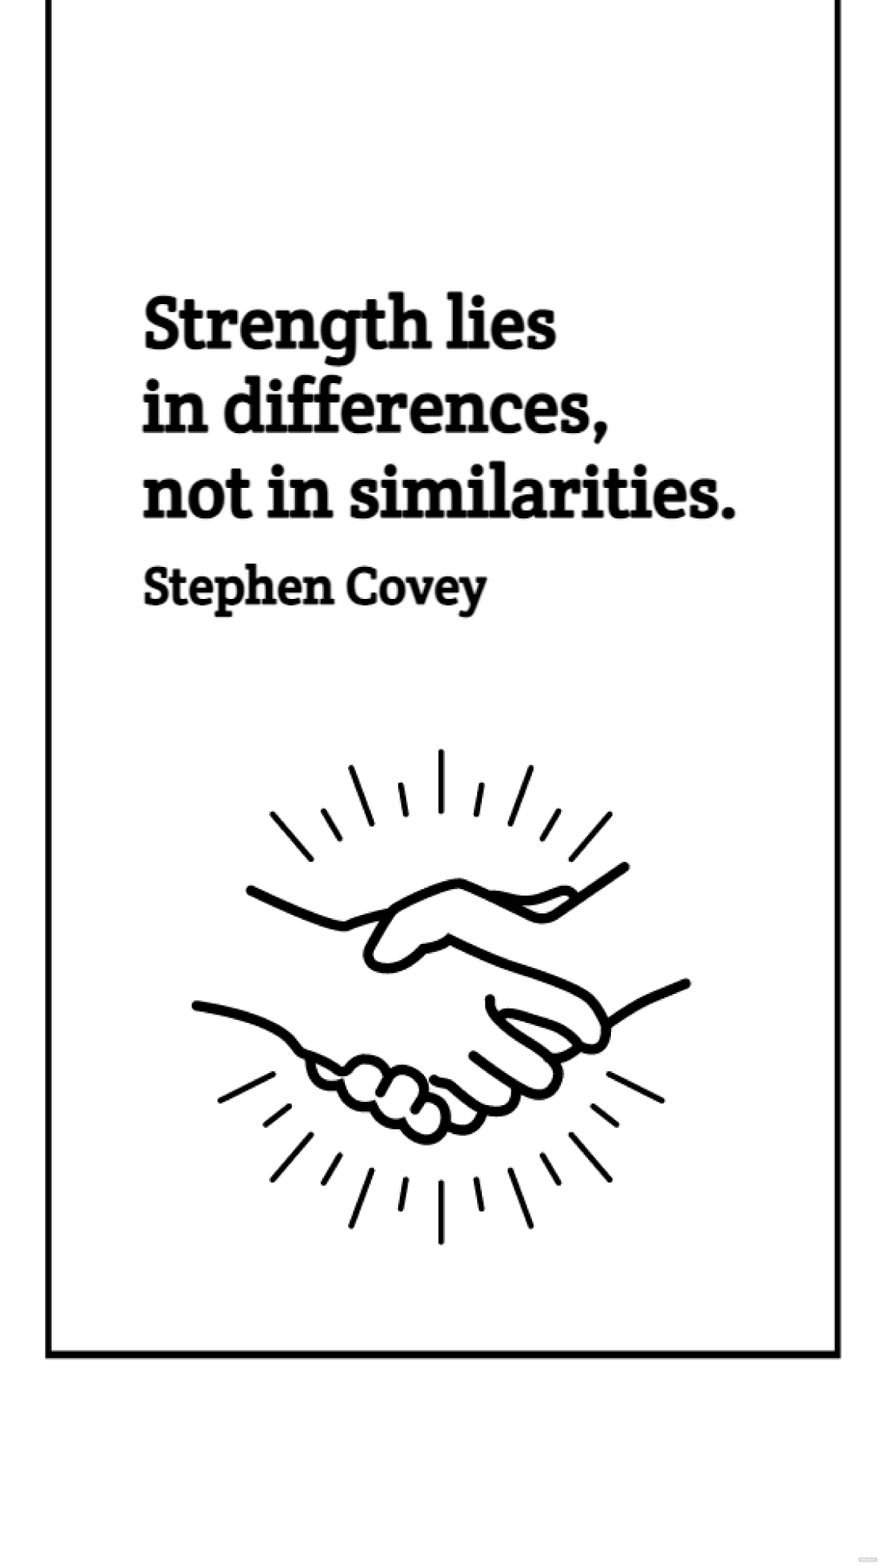 Free Stephen Covey - Strength lies in differences, not in similarities. in JPG